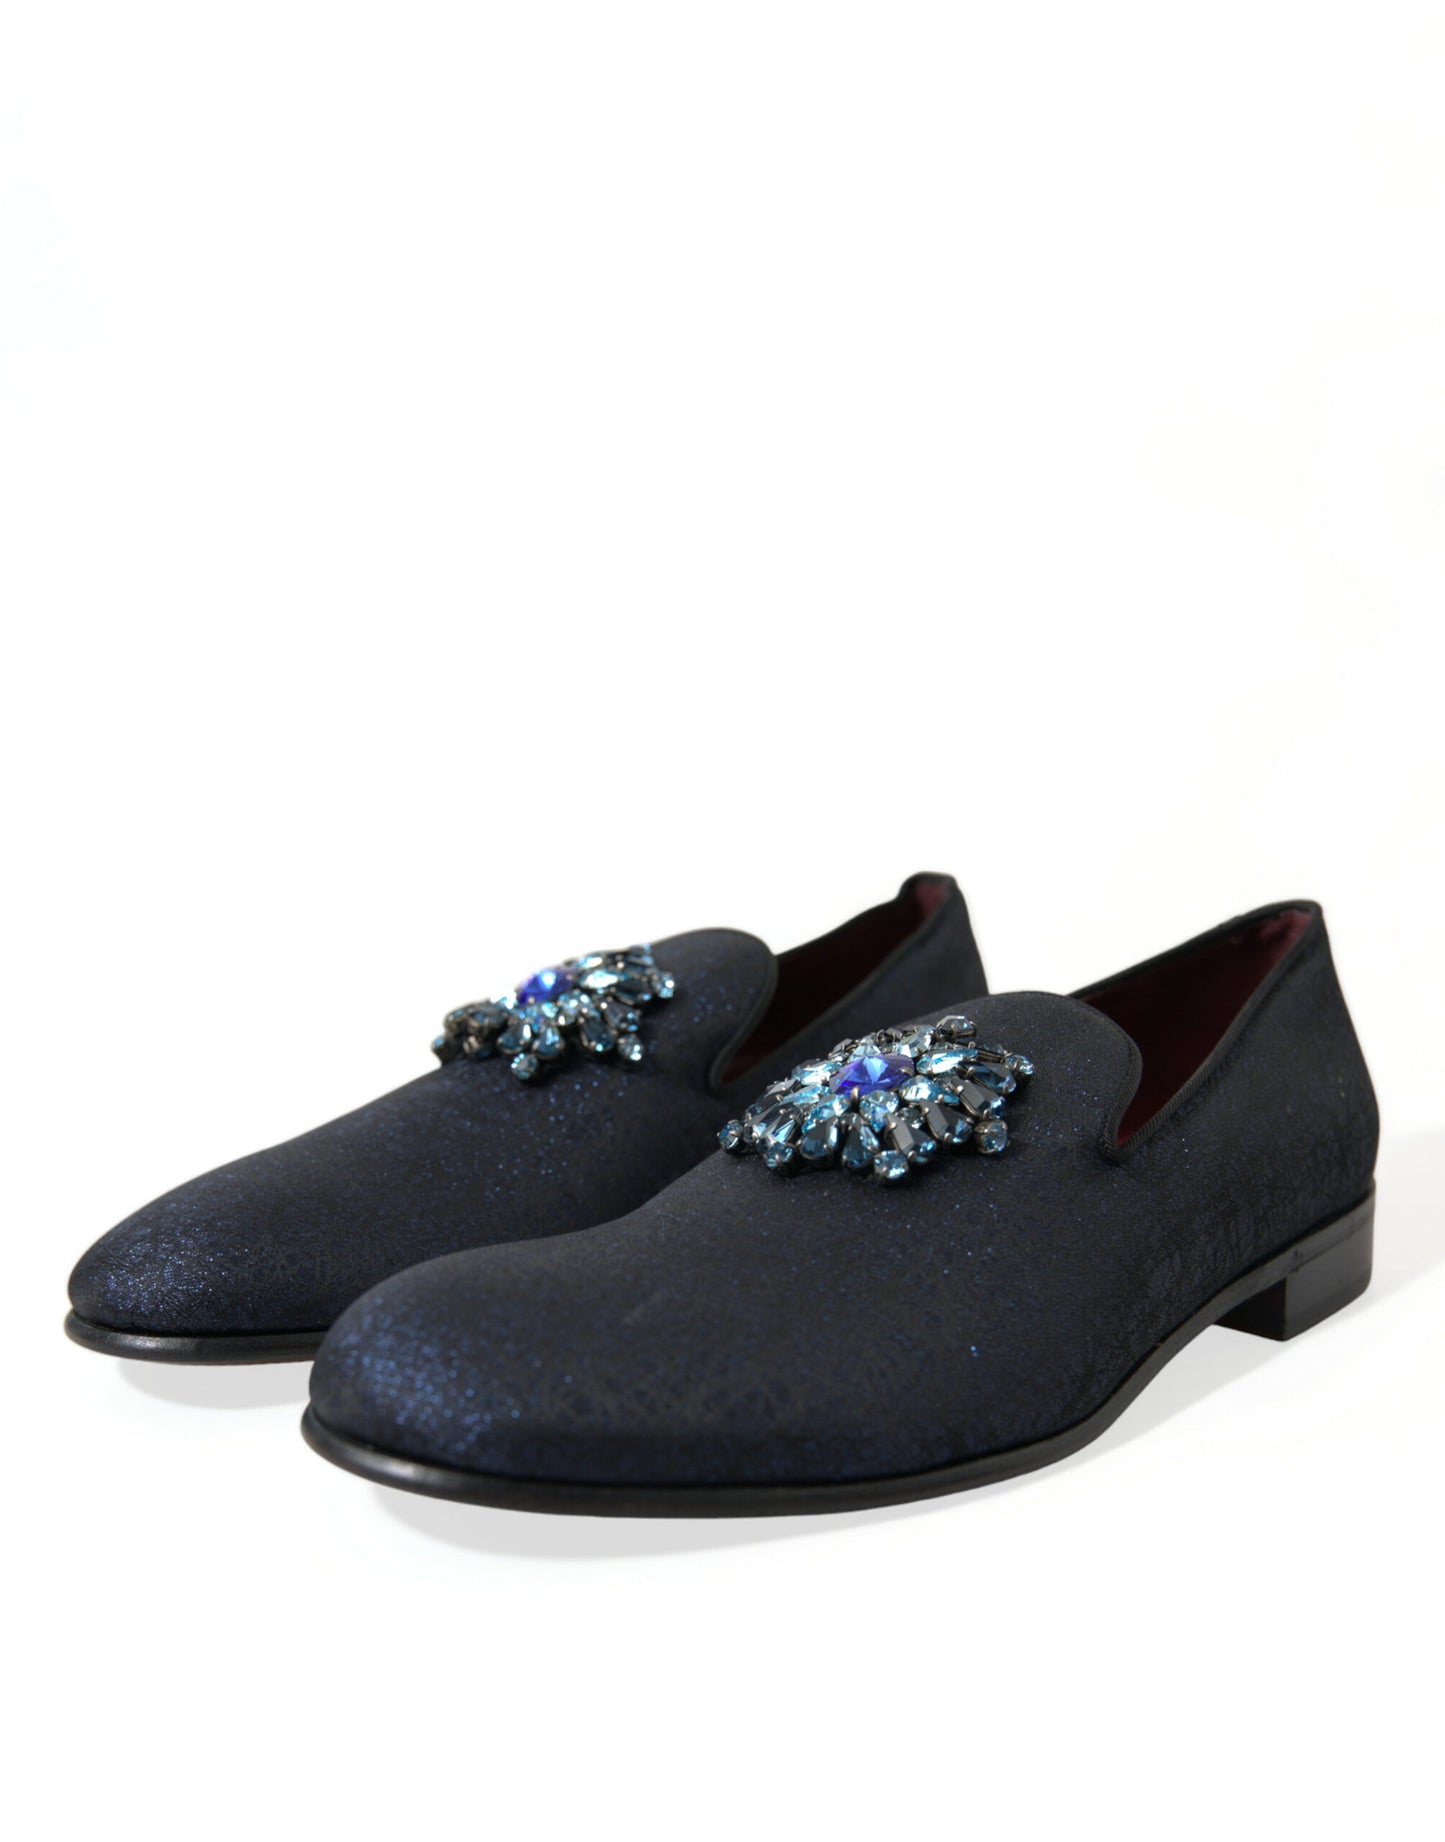 Dolce & Gabbana Elegant Blue Lurex Loafers with Crystal Accents